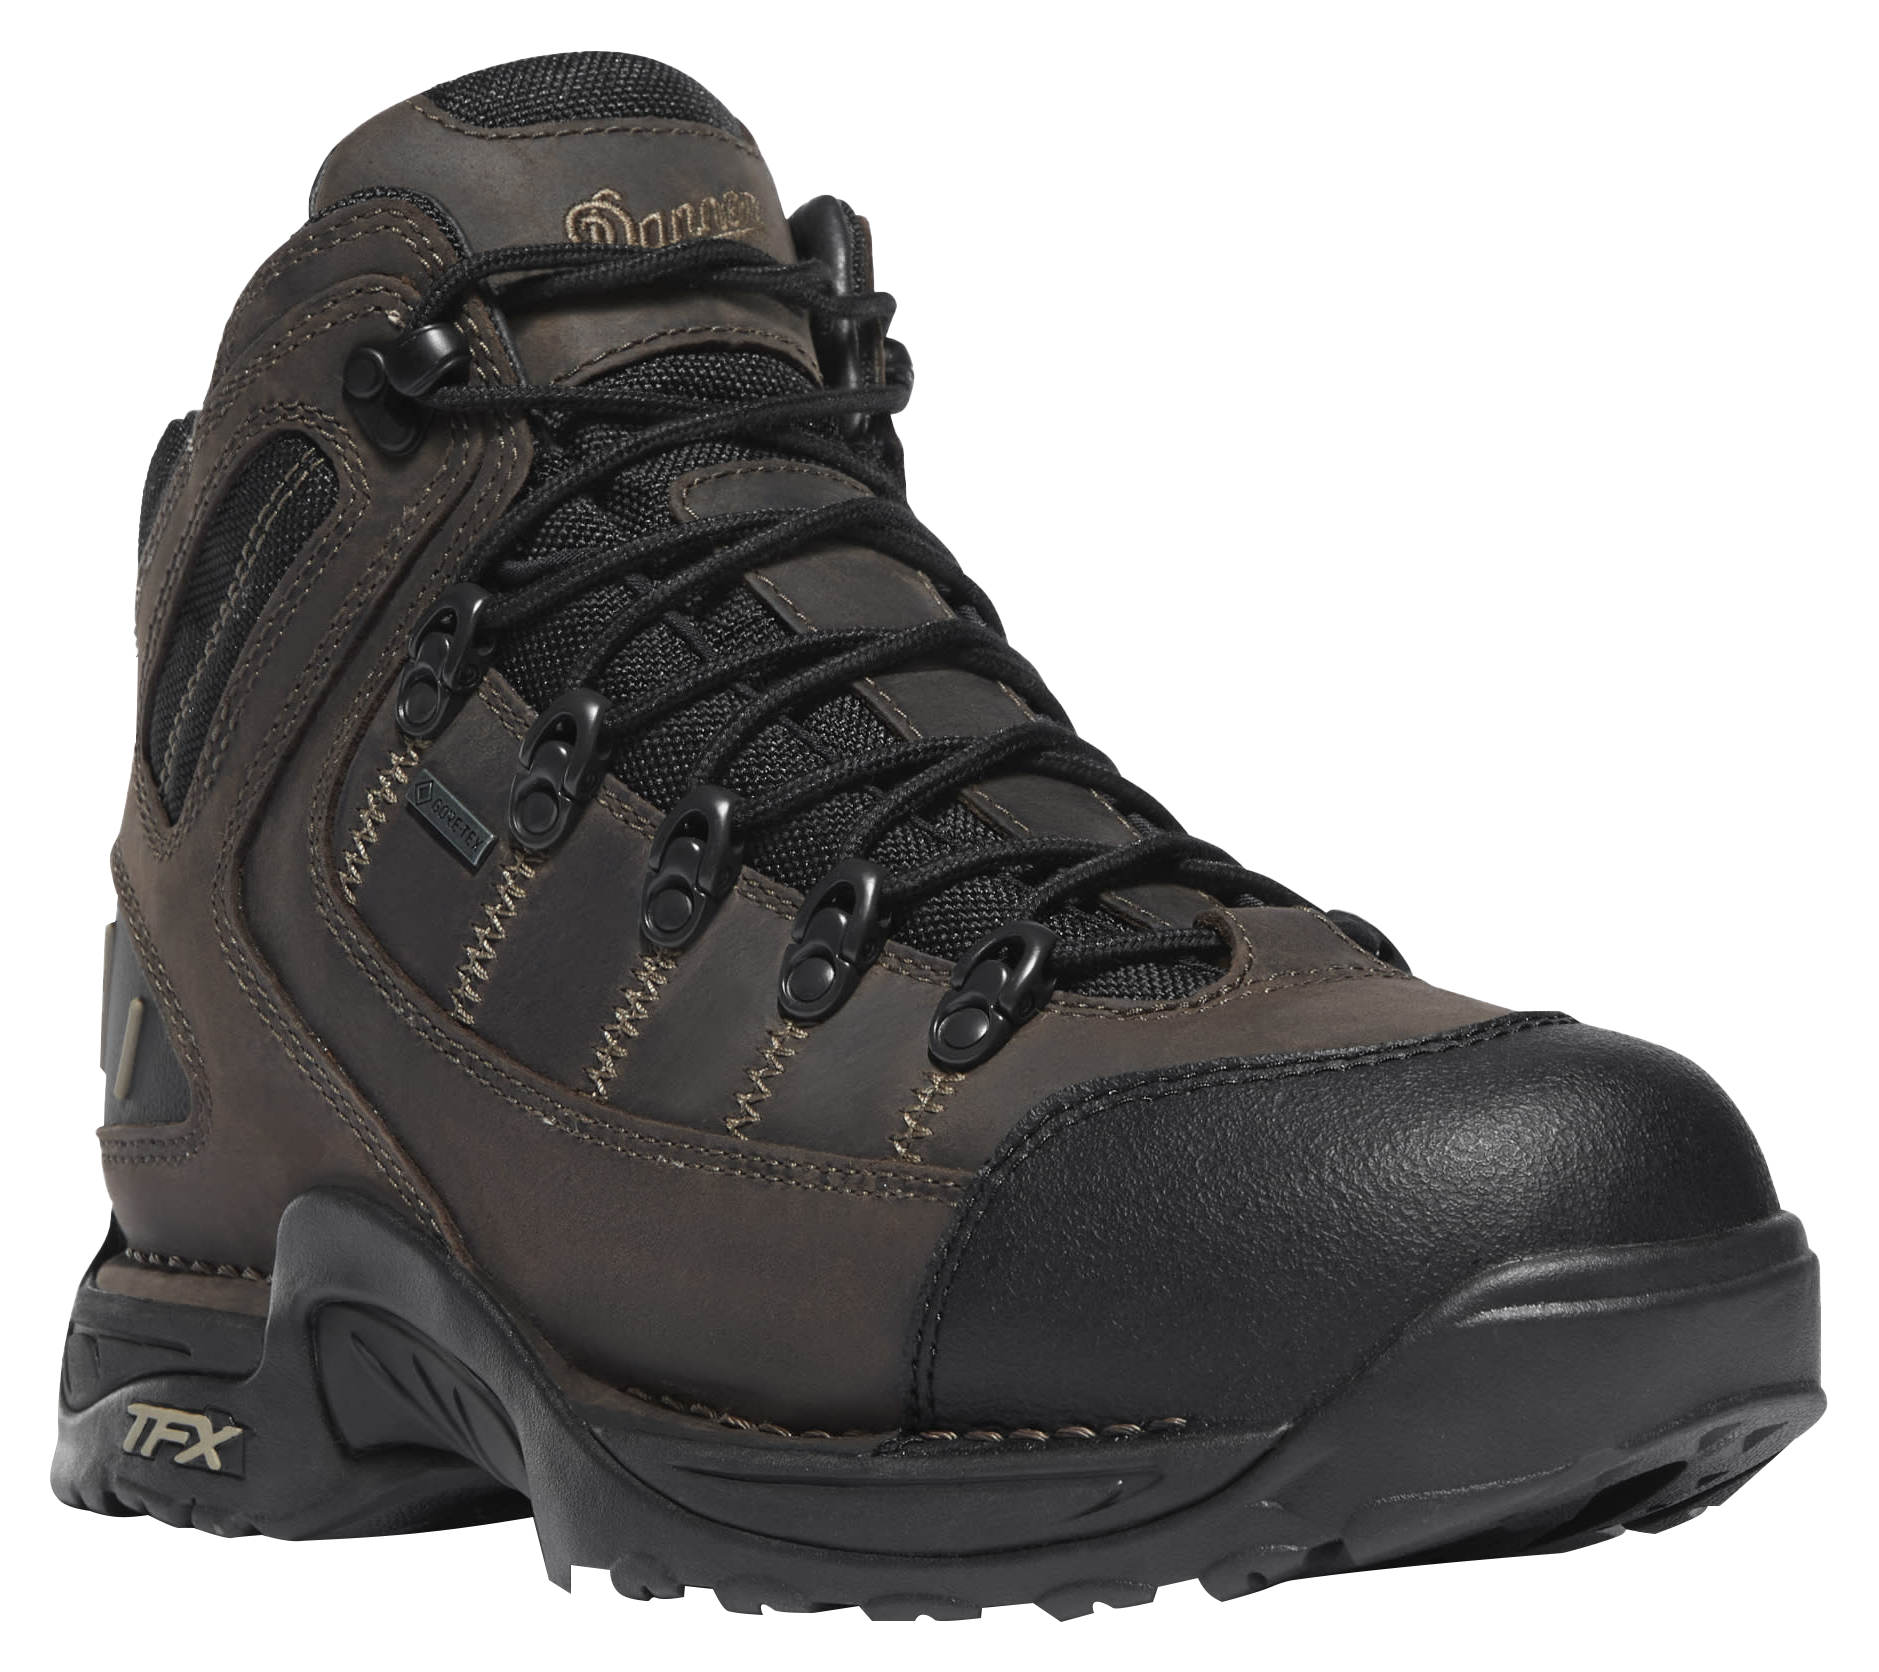 Danner 453 GORE-TEX Waterproof Hiking Boots for Men - Loam Brown/Chocolate Chip - 13M